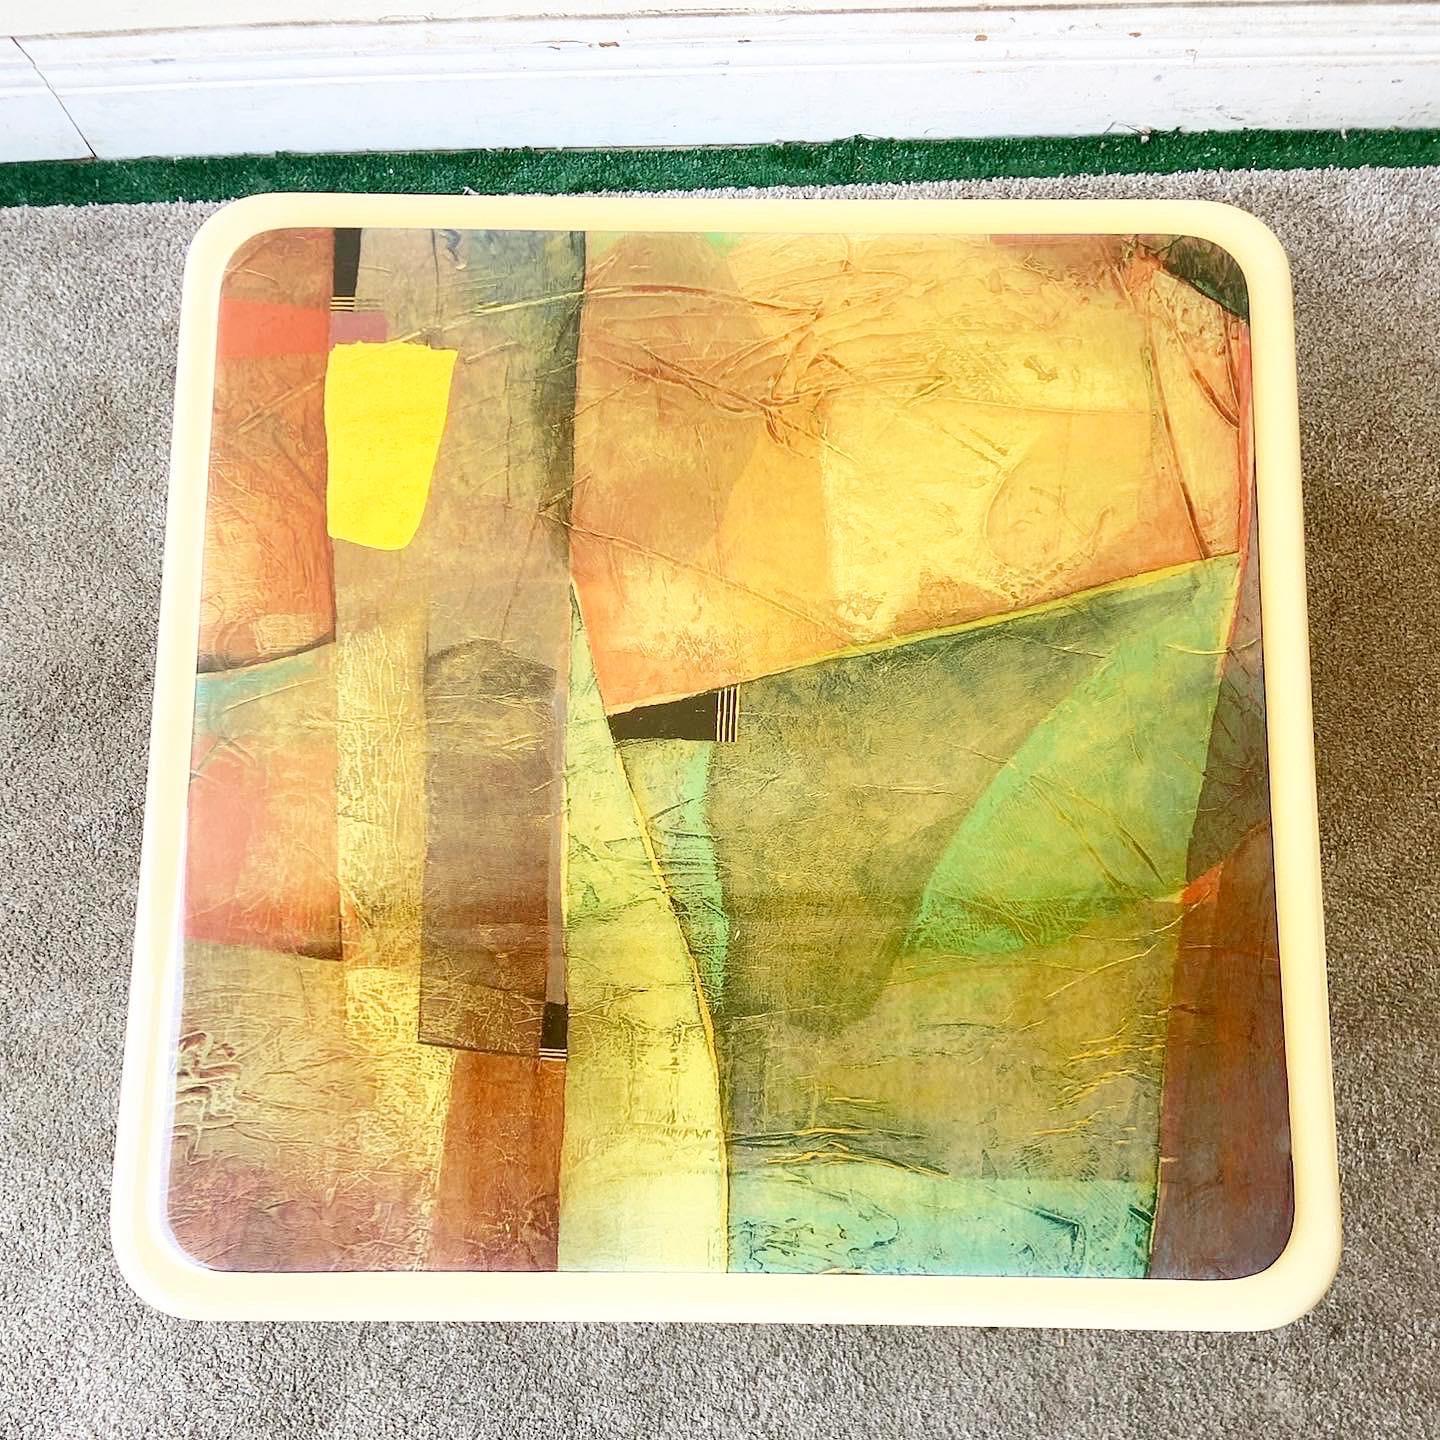 Amazing postmodern mushroom side tables. Each feature an abstract multi color top with a cream laminate base.

Additional information: 
Material: Wood
Color: Cream, Gold, Green, Red
Style: Postmodern
Time Period: 1980s
Place of origin: